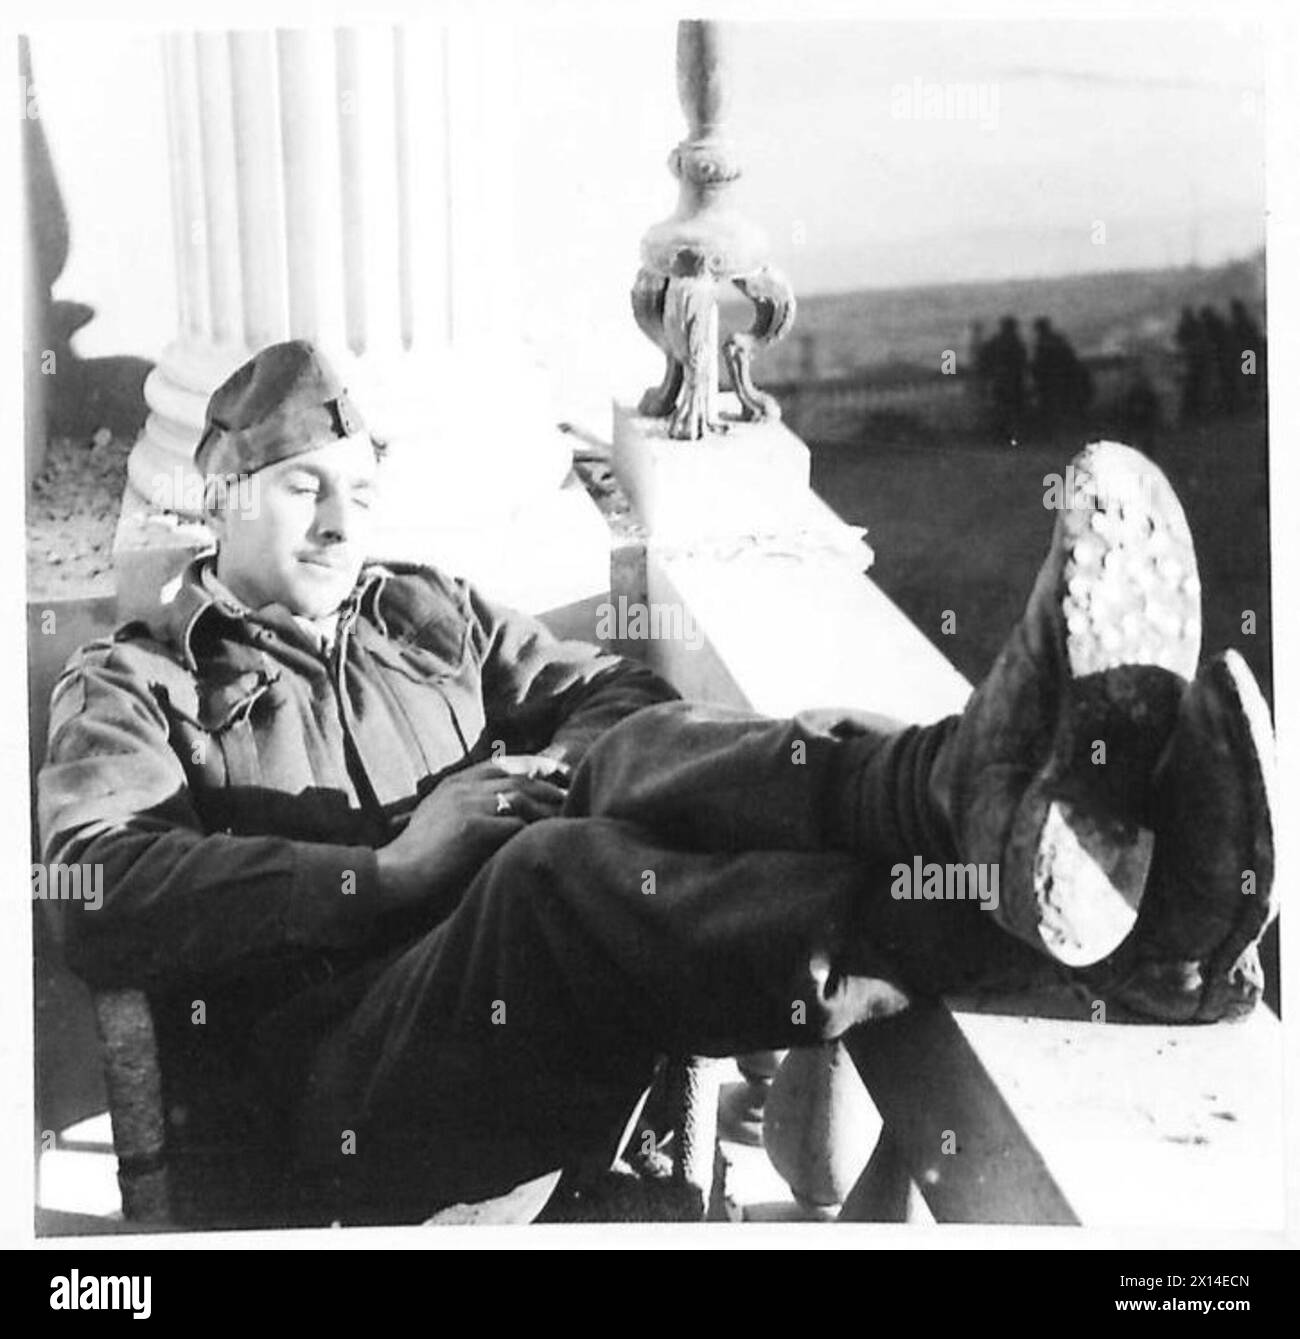 THE BRITISH ARMY IN NORTH AFRICA, SICILY, ITALY, THE BALKANS AND AUSTRIA 1942-1946 - Pte. R. Osborne of the 49 Edmonton Regiment, the Loyals Regiment, taking life easy as he sits back on the balcony of the Teatro Vittoria in Ortona listening to the band of the 1st Canadian Infantry British Army Stock Photo